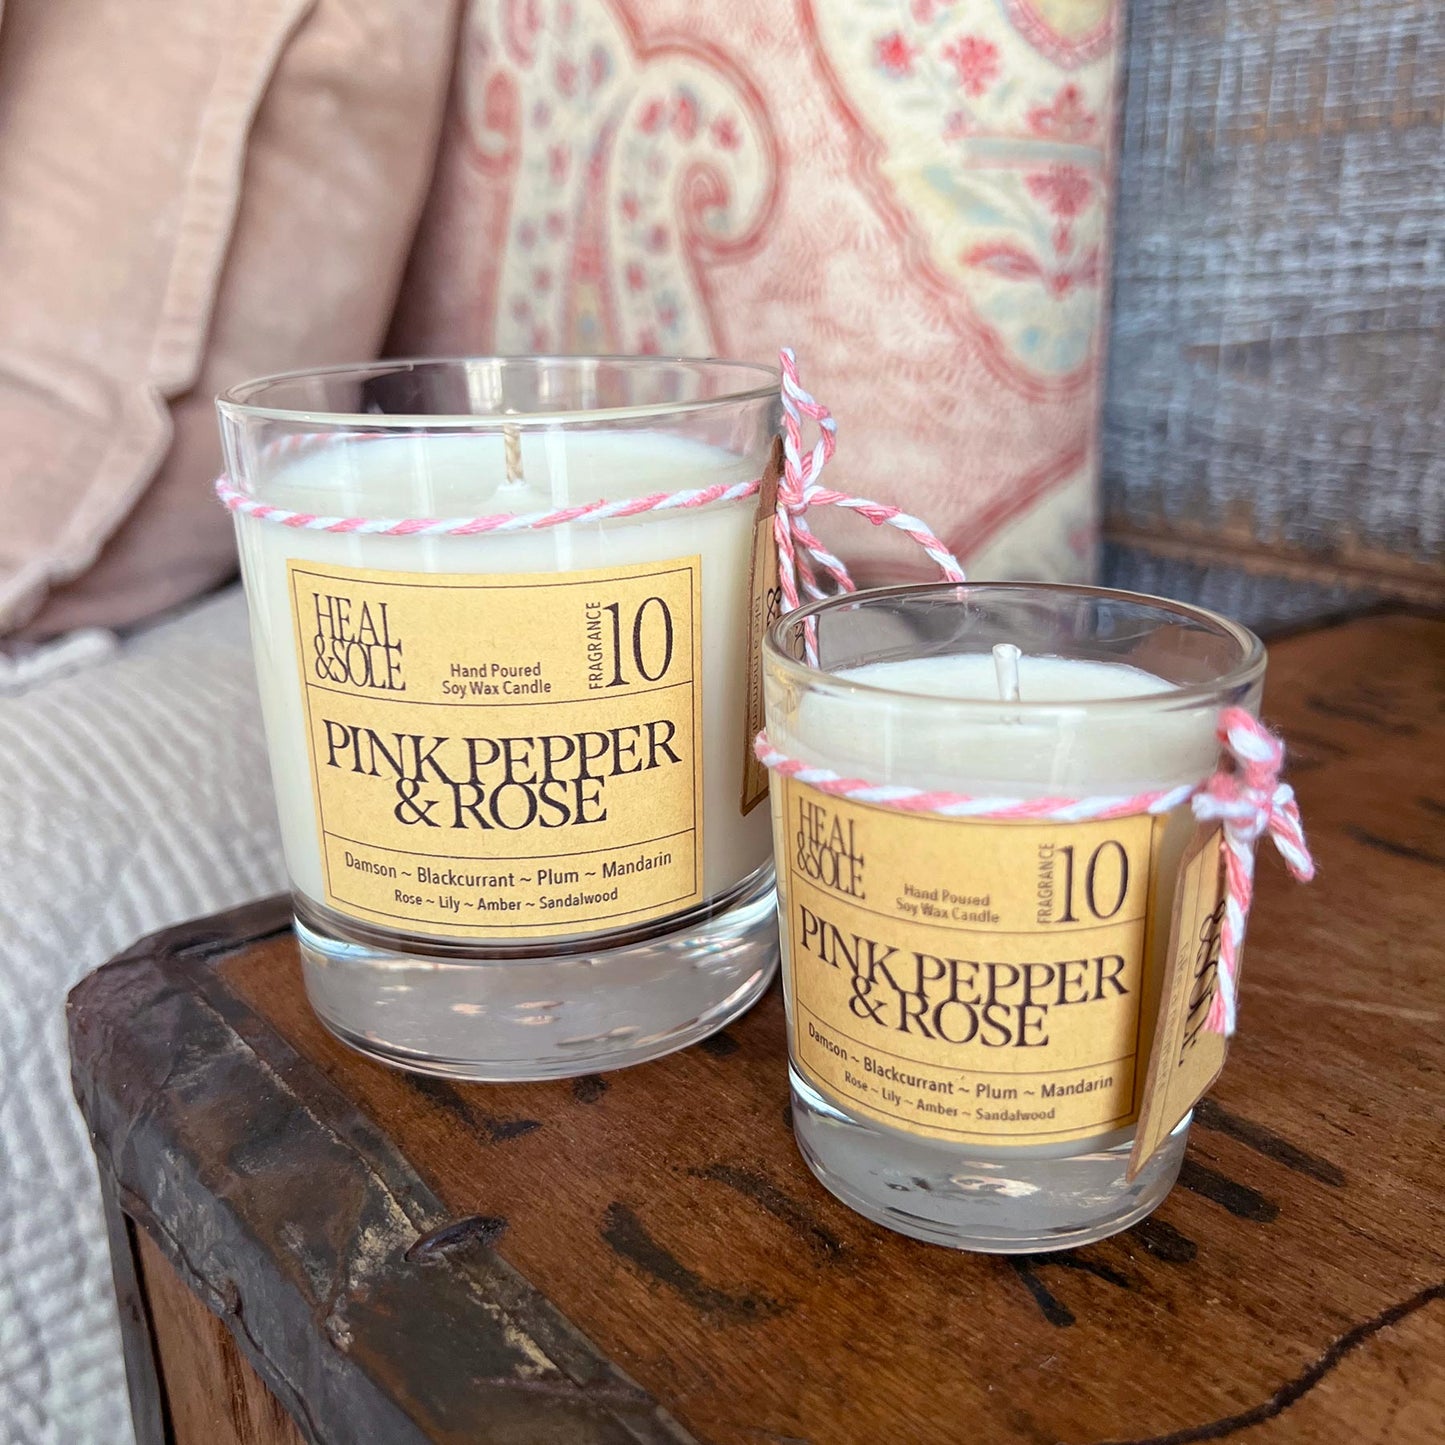 Pink Pepper & Rose Candle